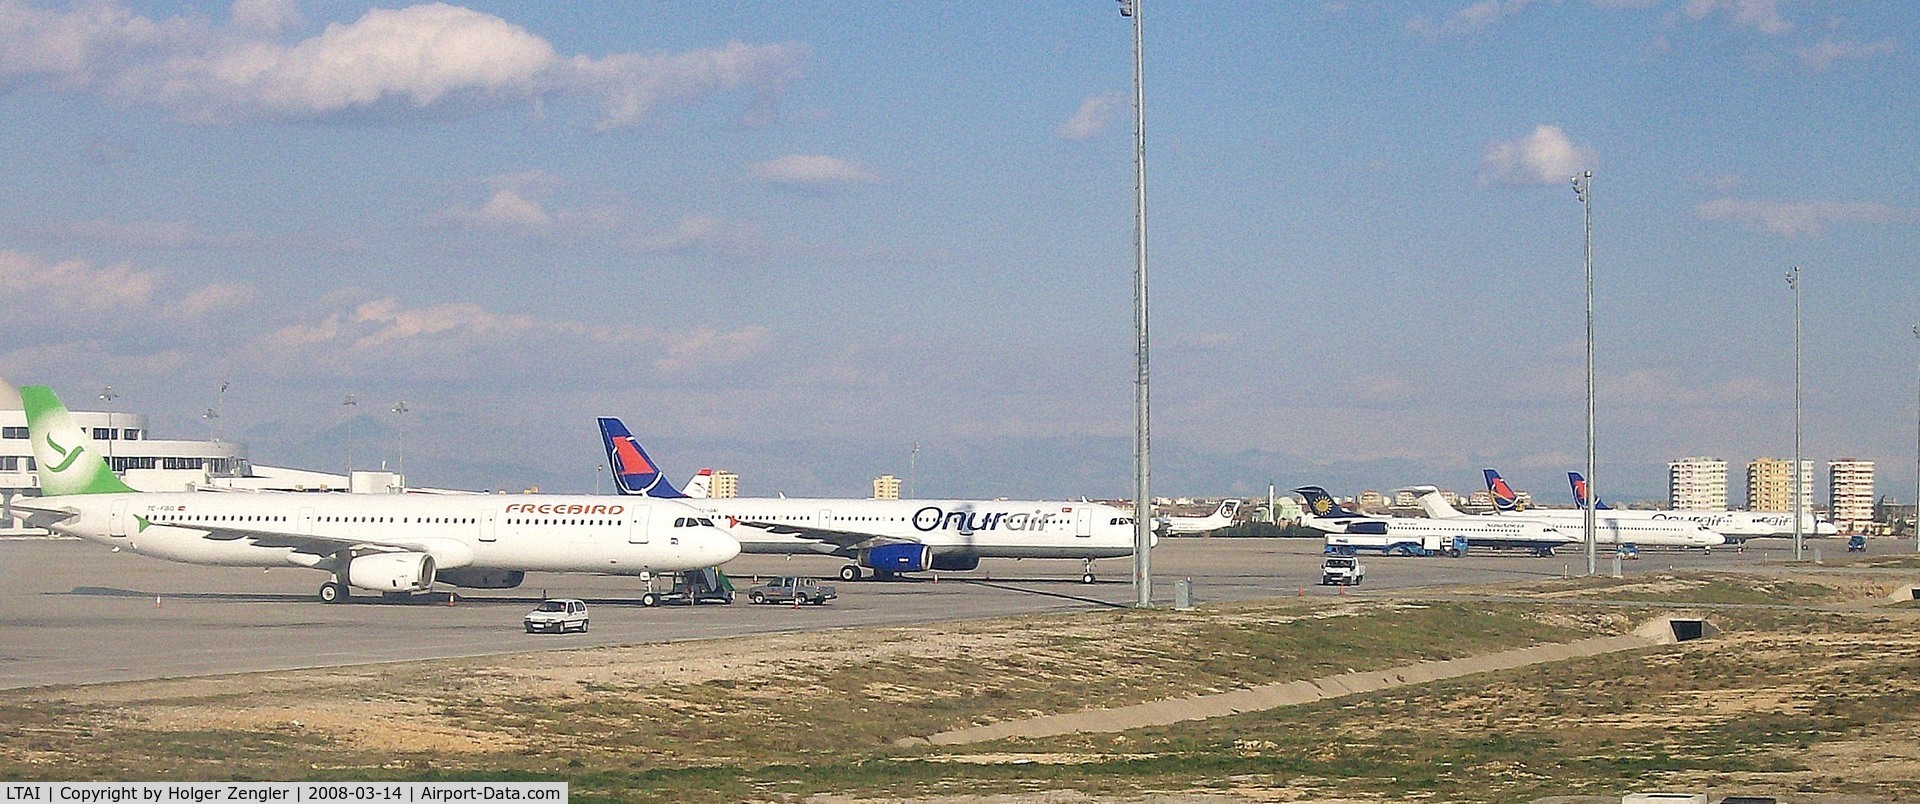 Antalya Airport, Antalya Turkey (LTAI) - Outer parking positions only with Turkish airliners